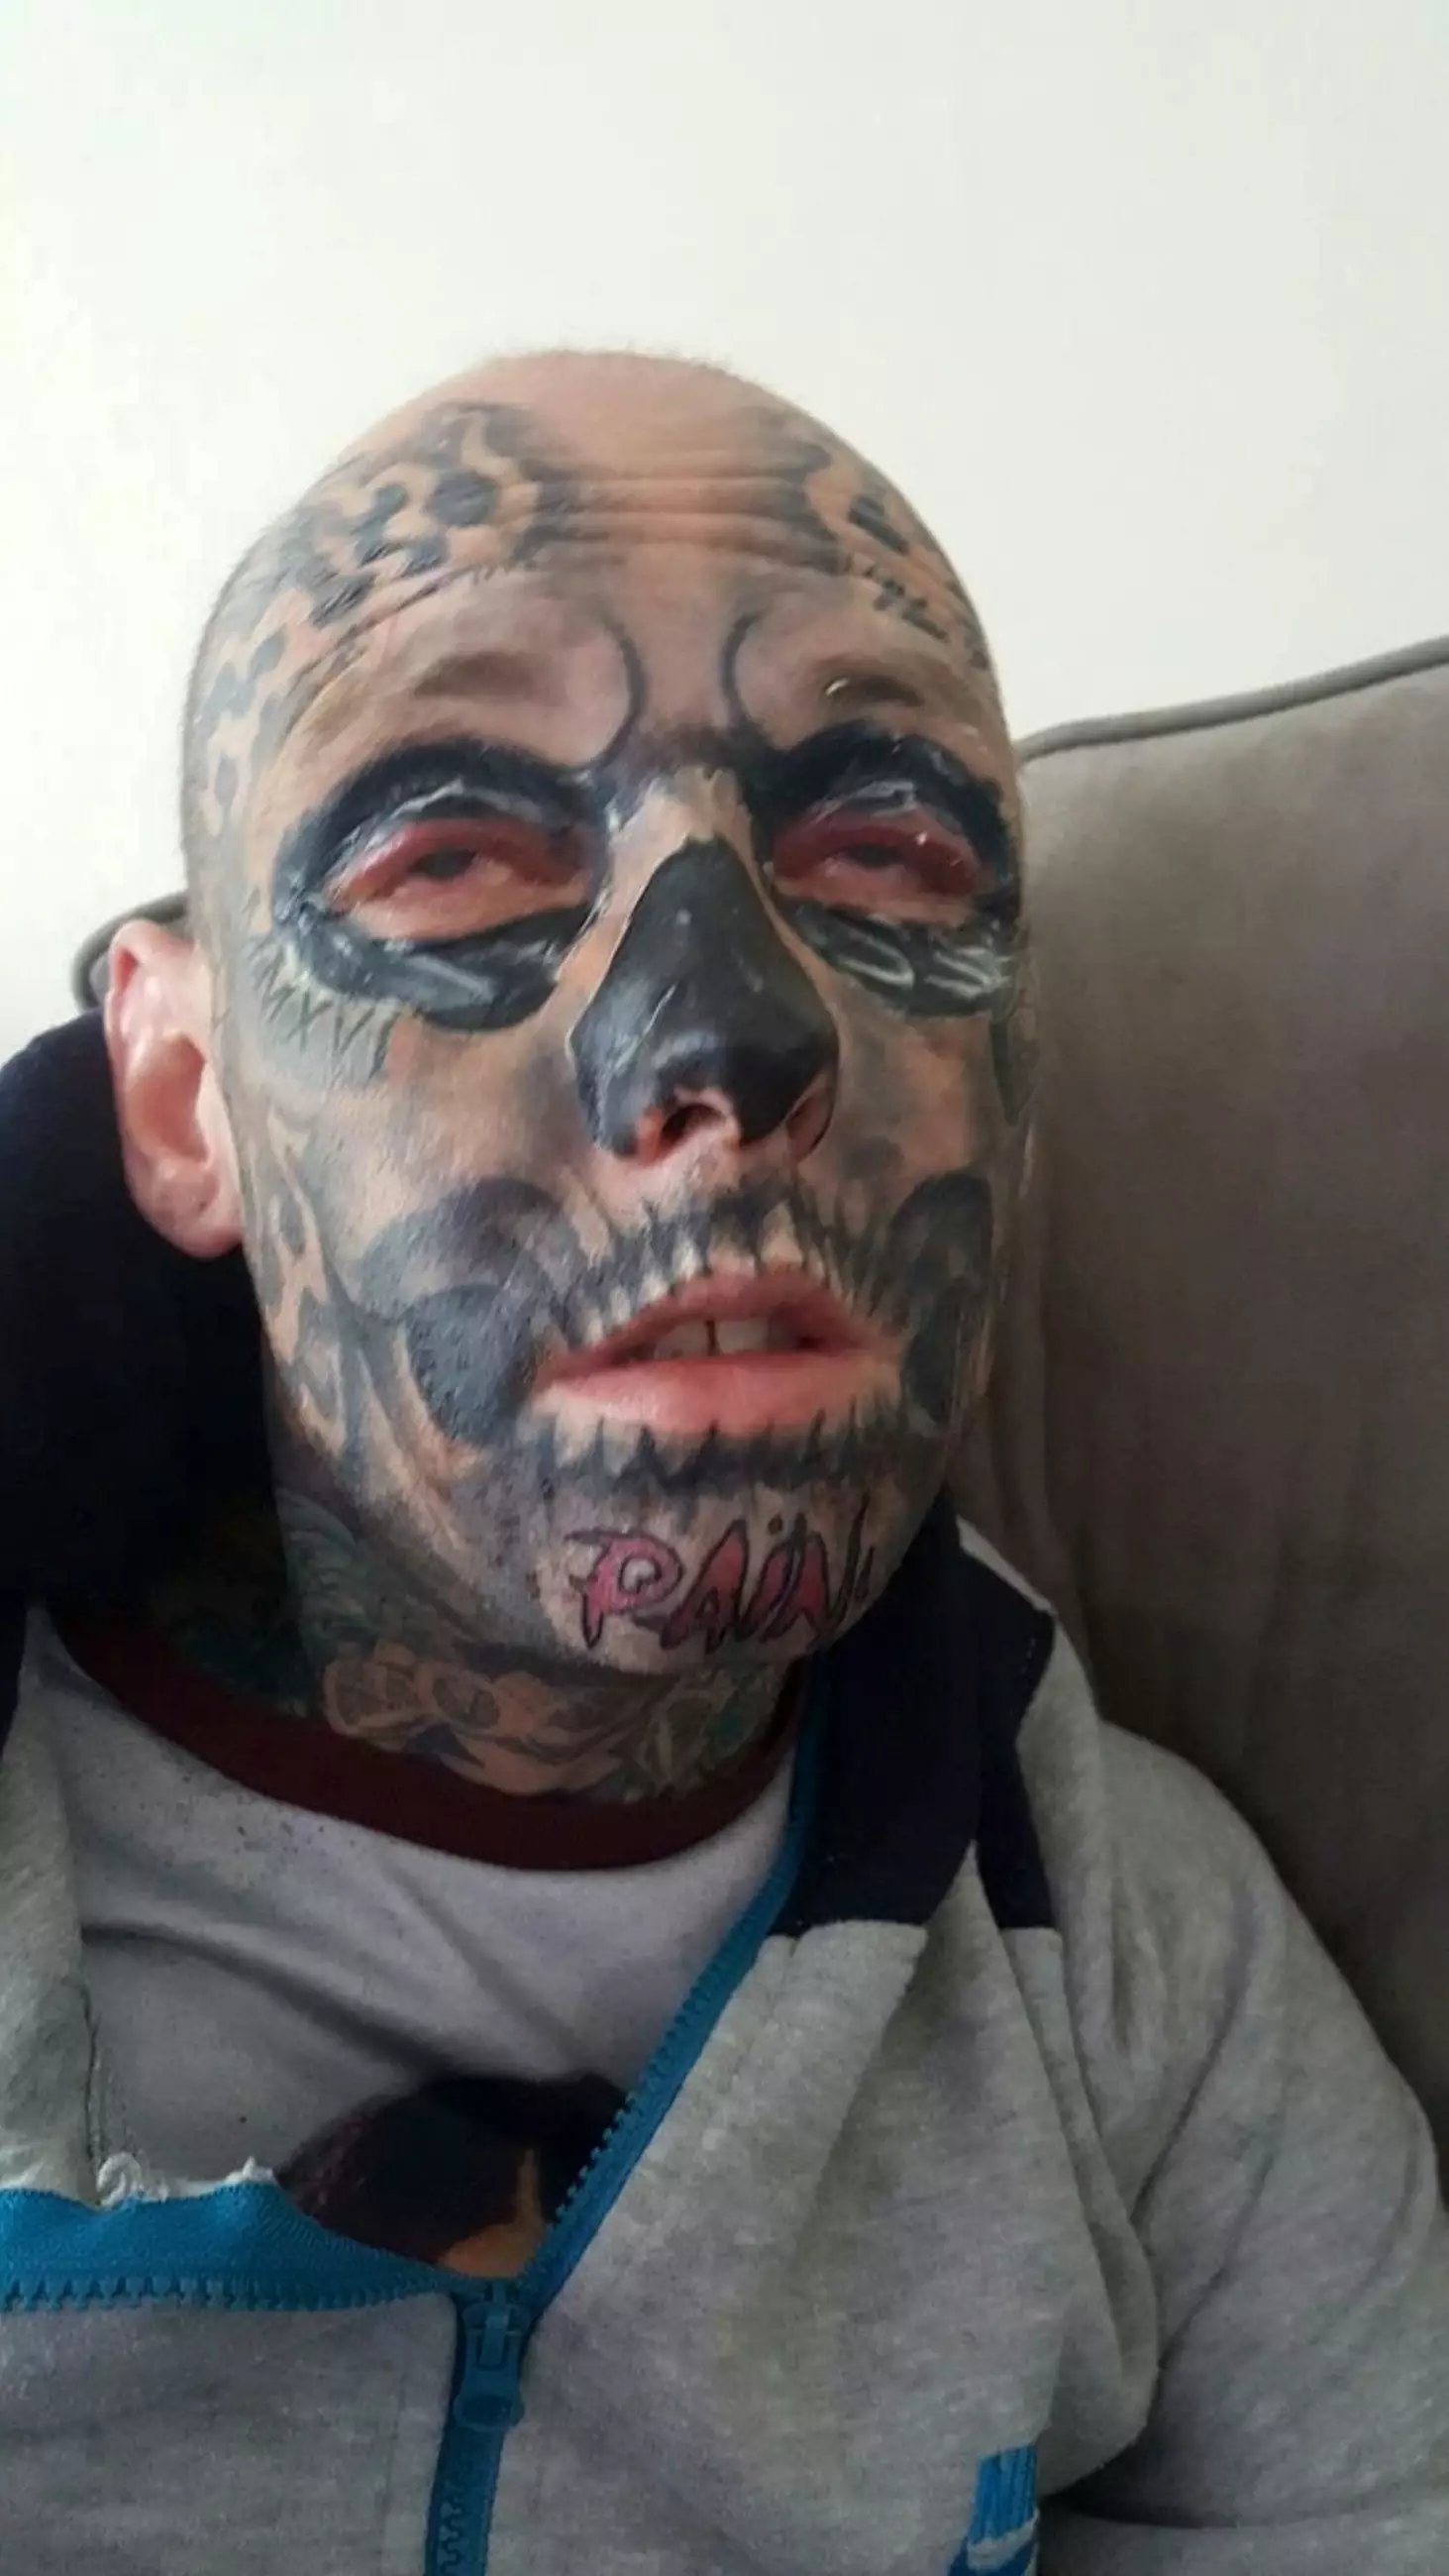 His eyelid tattoos left Chris 'blind for three days'.